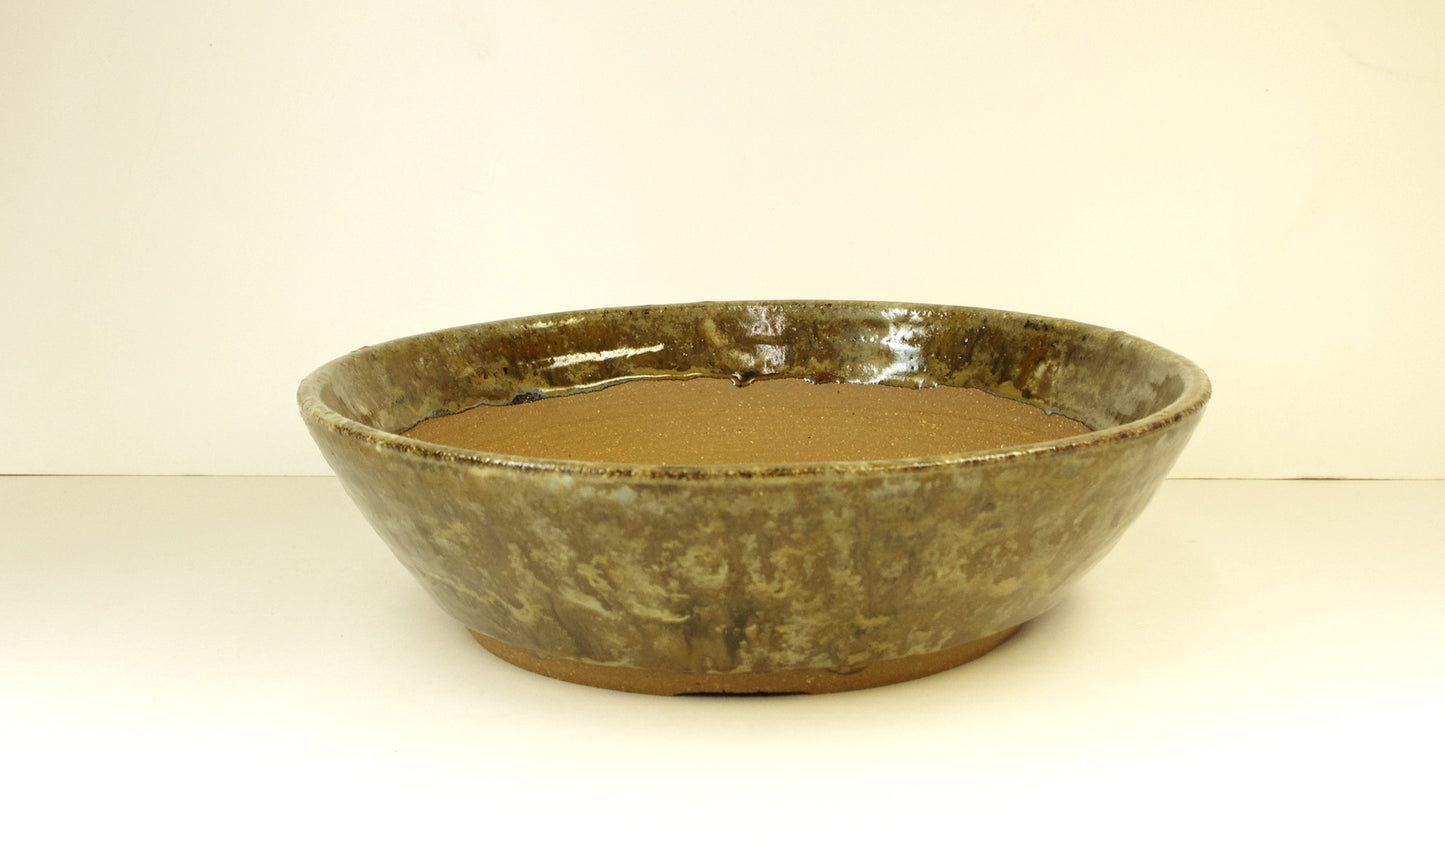 Hand Thrown Stoneware Bonsai Pot, Extra Wire Holes, Greenish Browns, Tans, Browns, 8 7/8 x 2 1/2